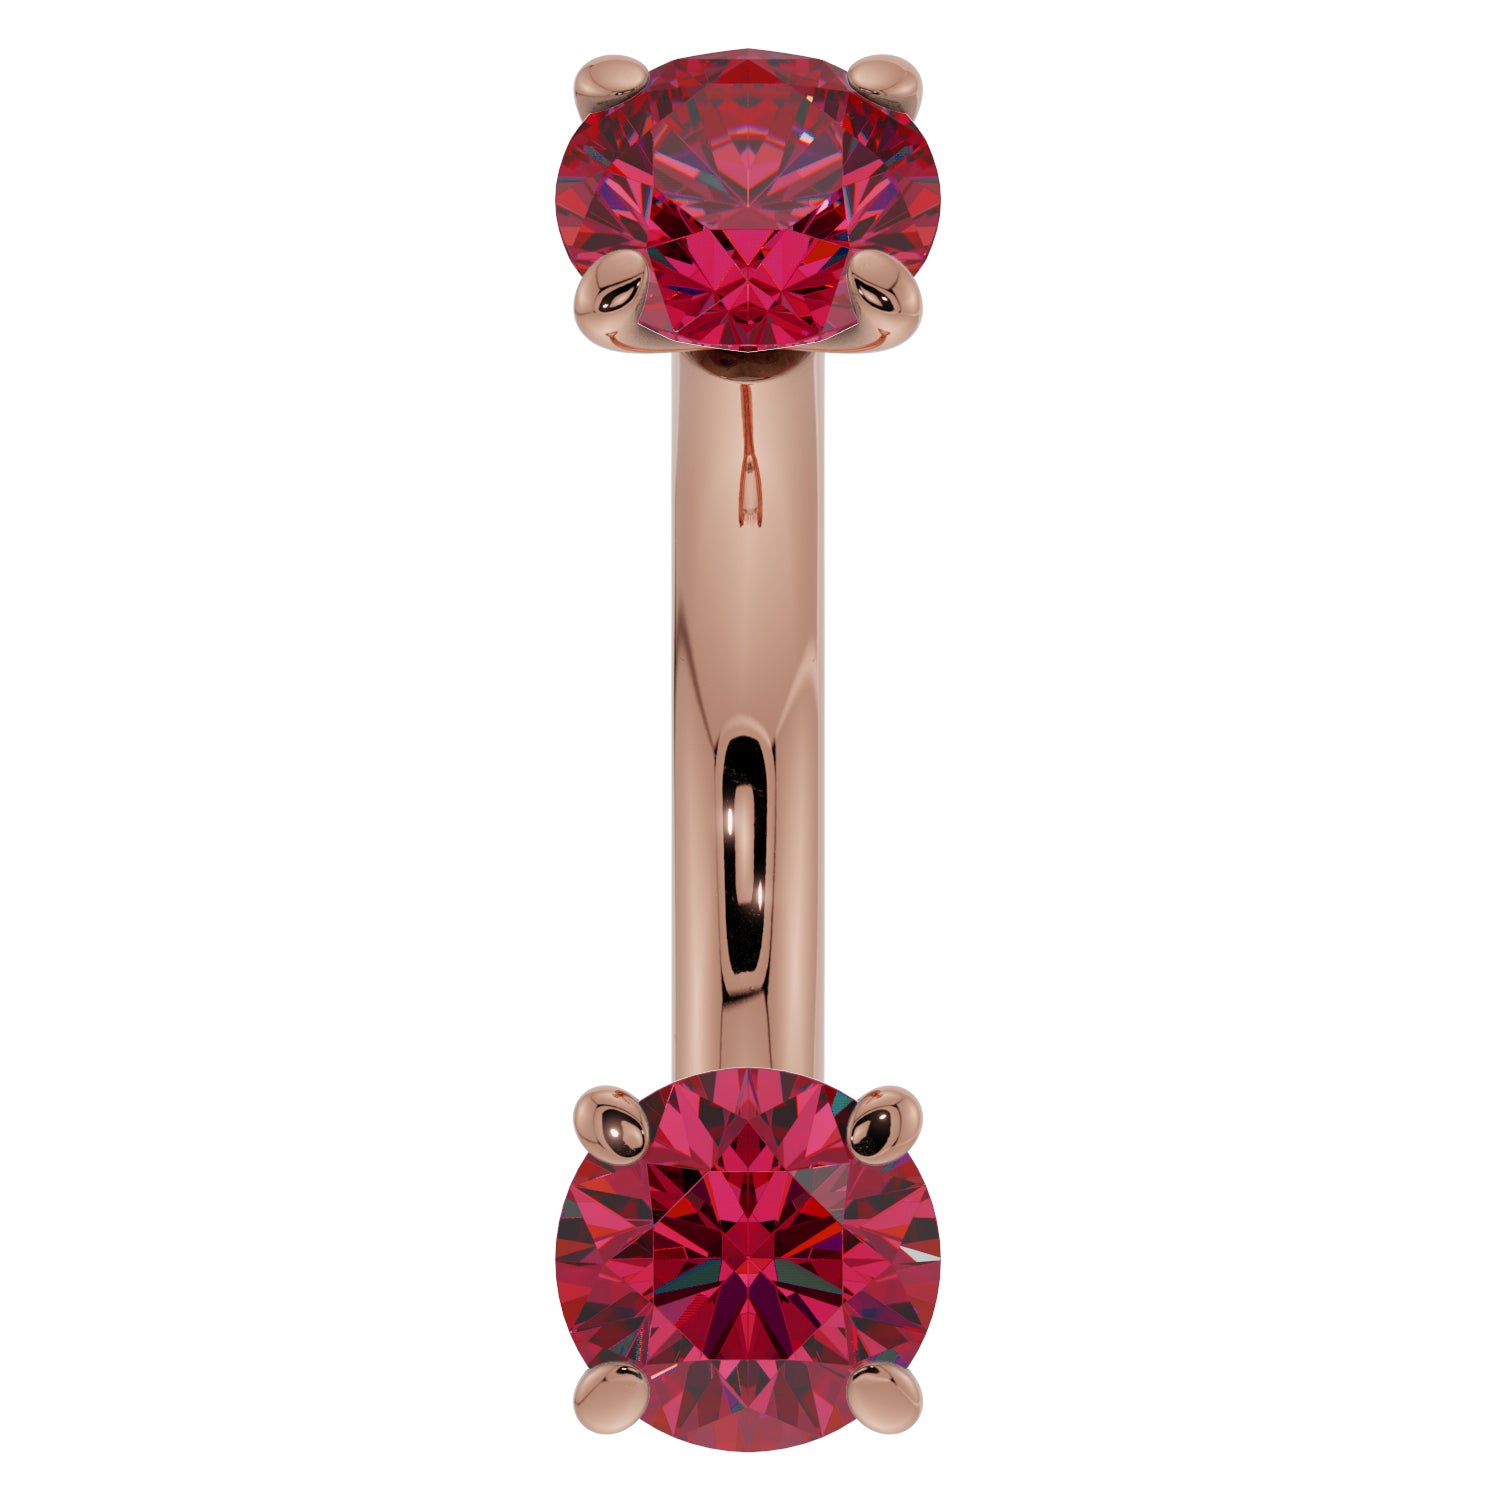 Ruby Prong-Set Eyebrow Rook Belly Curved Barbell-14K Rose Gold   14G (1.6mm) (Belly Ring)   7 16